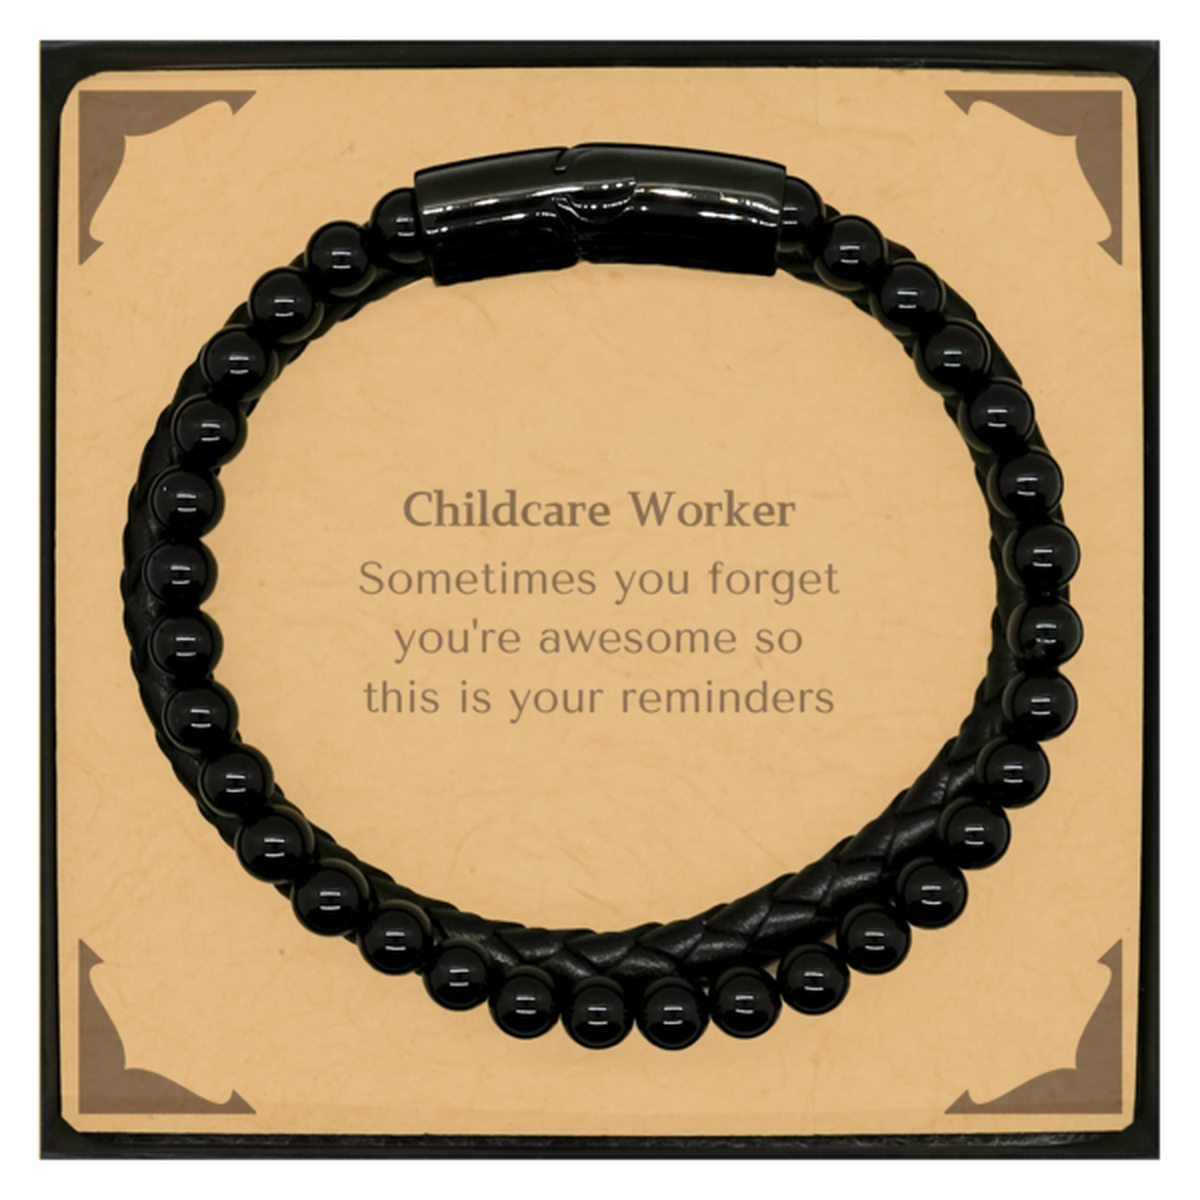 Sentimental Childcare Worker Stone Leather Bracelets, Childcare Worker Sometimes you forget you're awesome so this is your reminders, Graduation Christmas Birthday Gifts for Childcare Worker, Men, Women, Coworkers